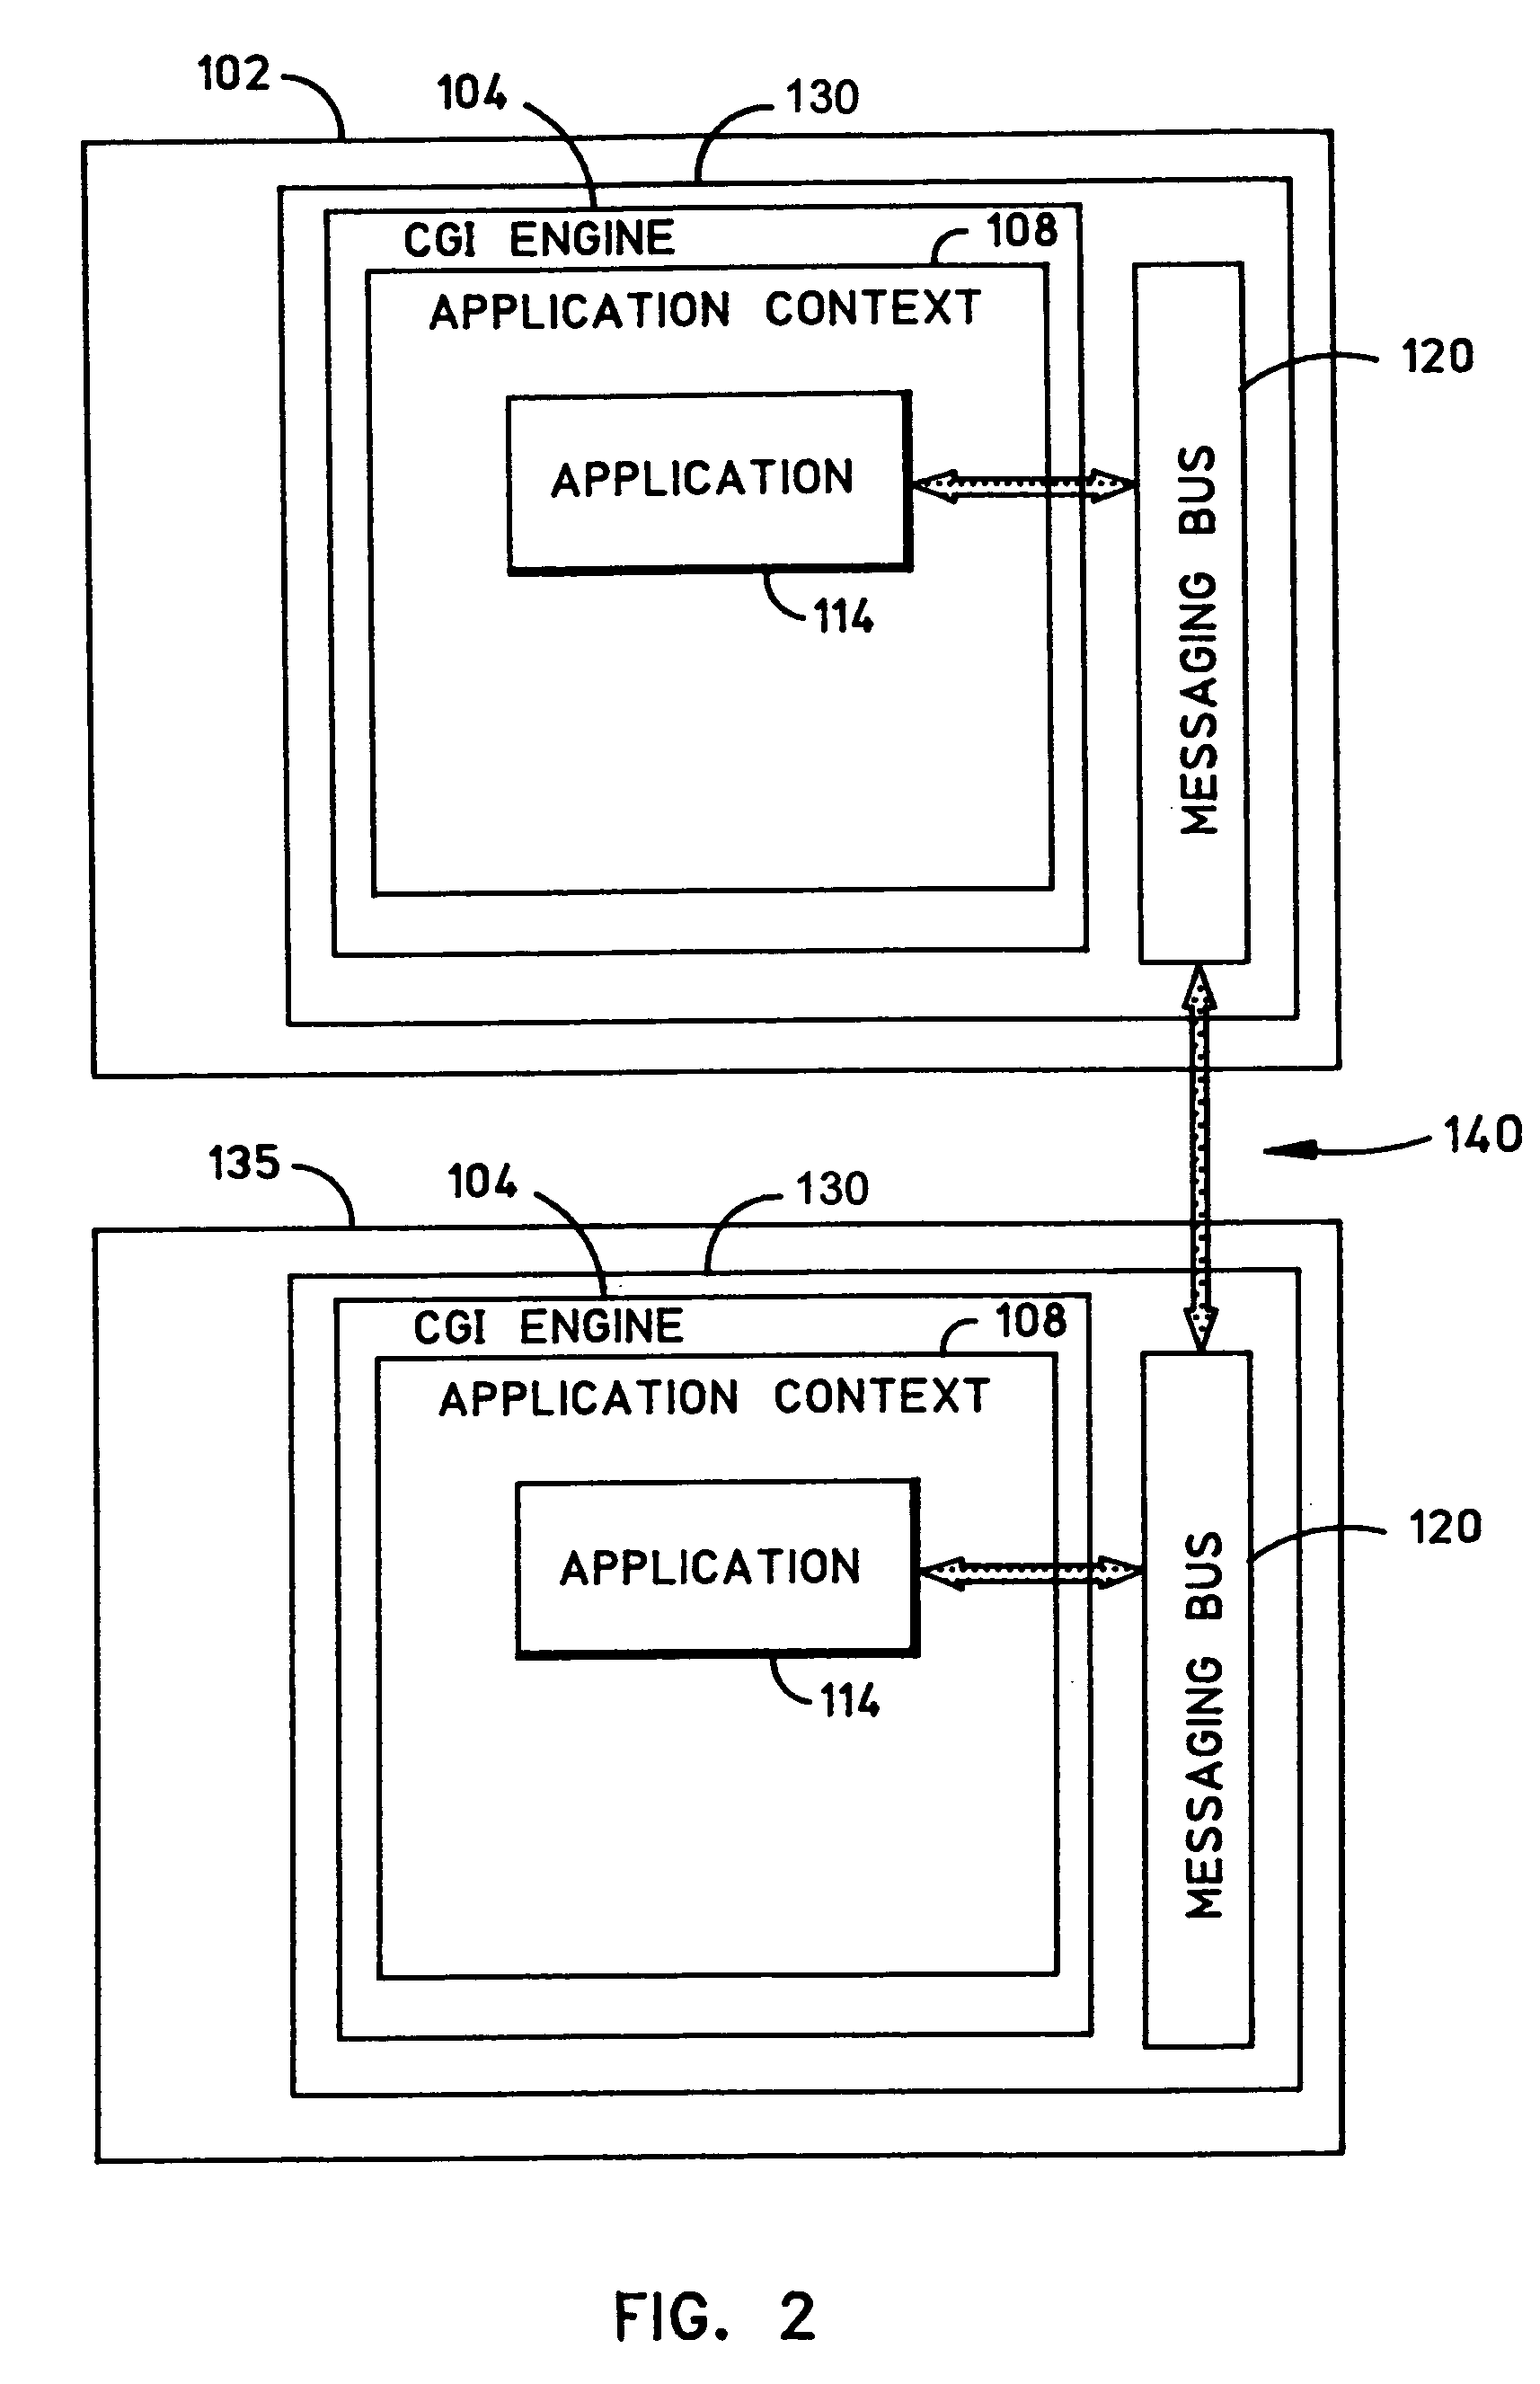 System and method for collaborative processing of distributed applications